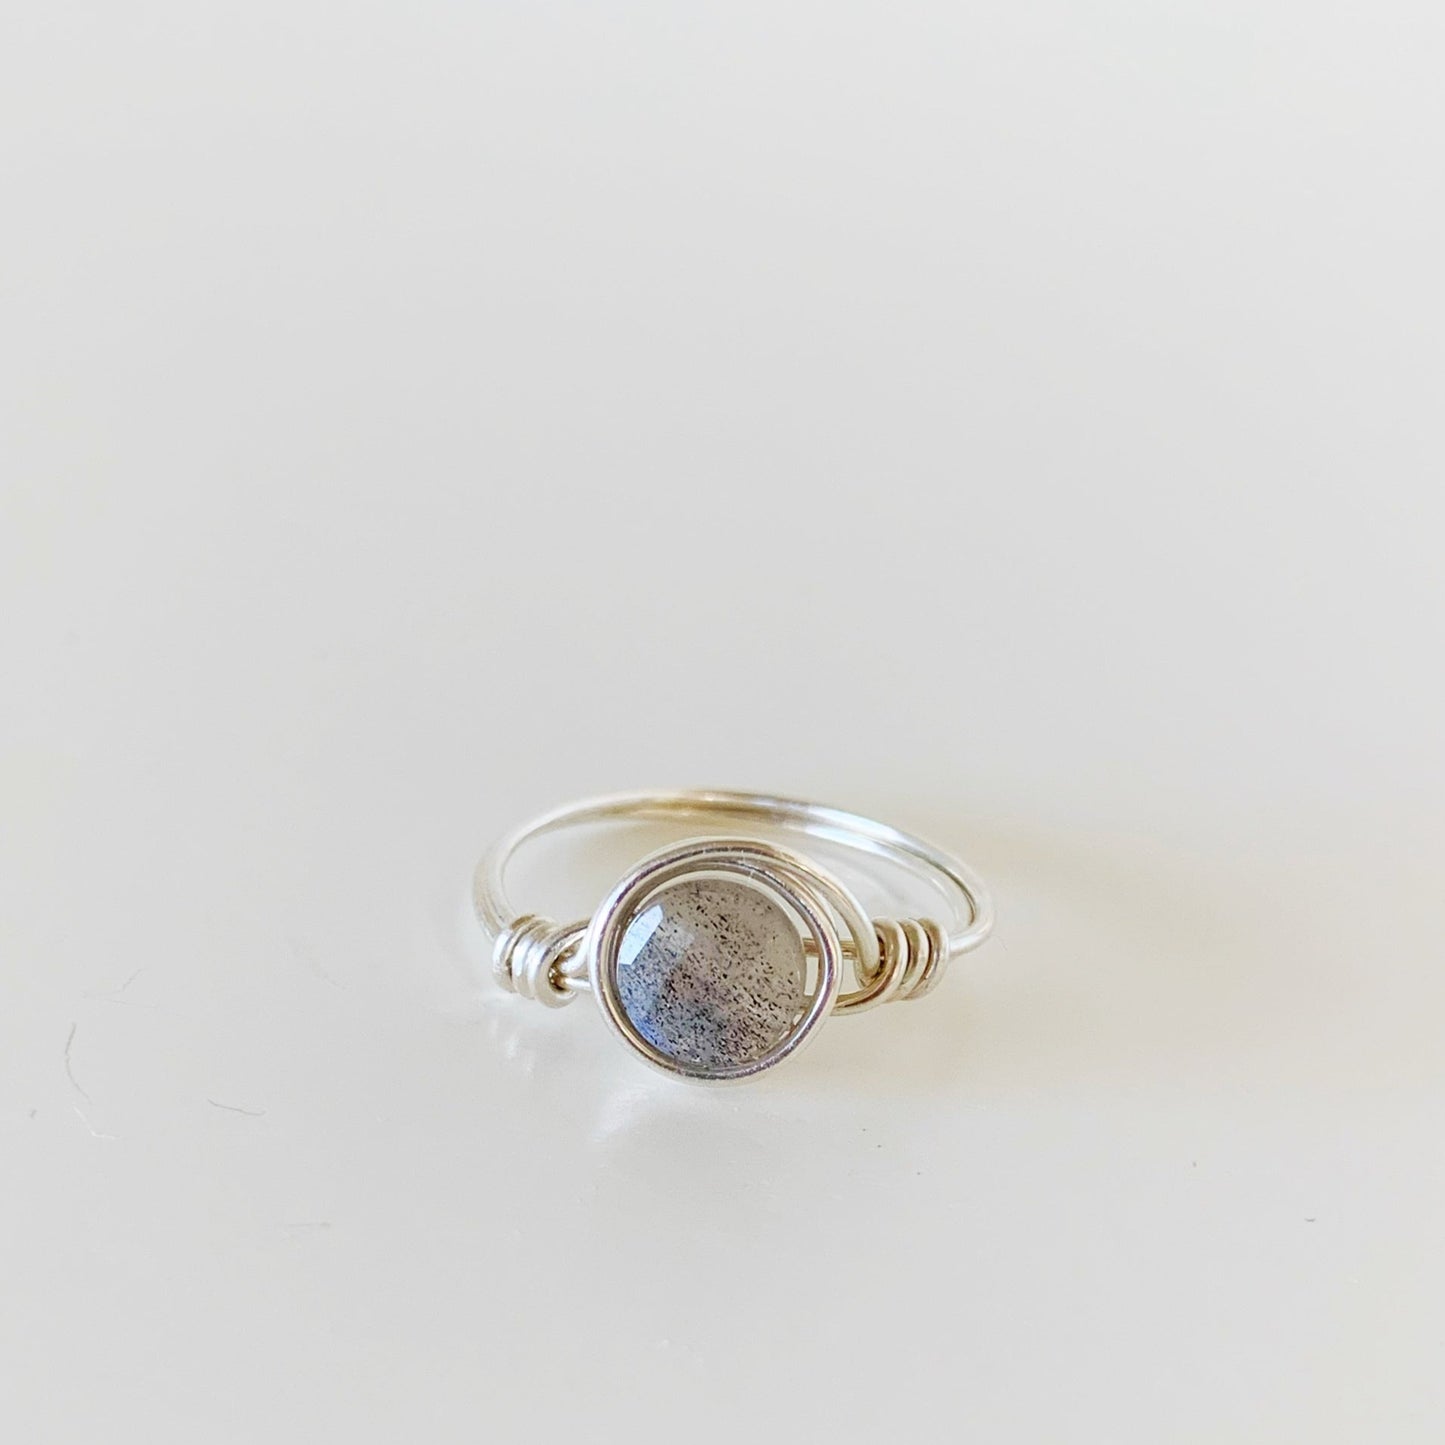 the mermaids and madeleines arctic ring is a wire-wrapped ring created with sterling silver wire and a faceted coin labadorite bead at the center. this ring is facing forward and photographed on a white surface